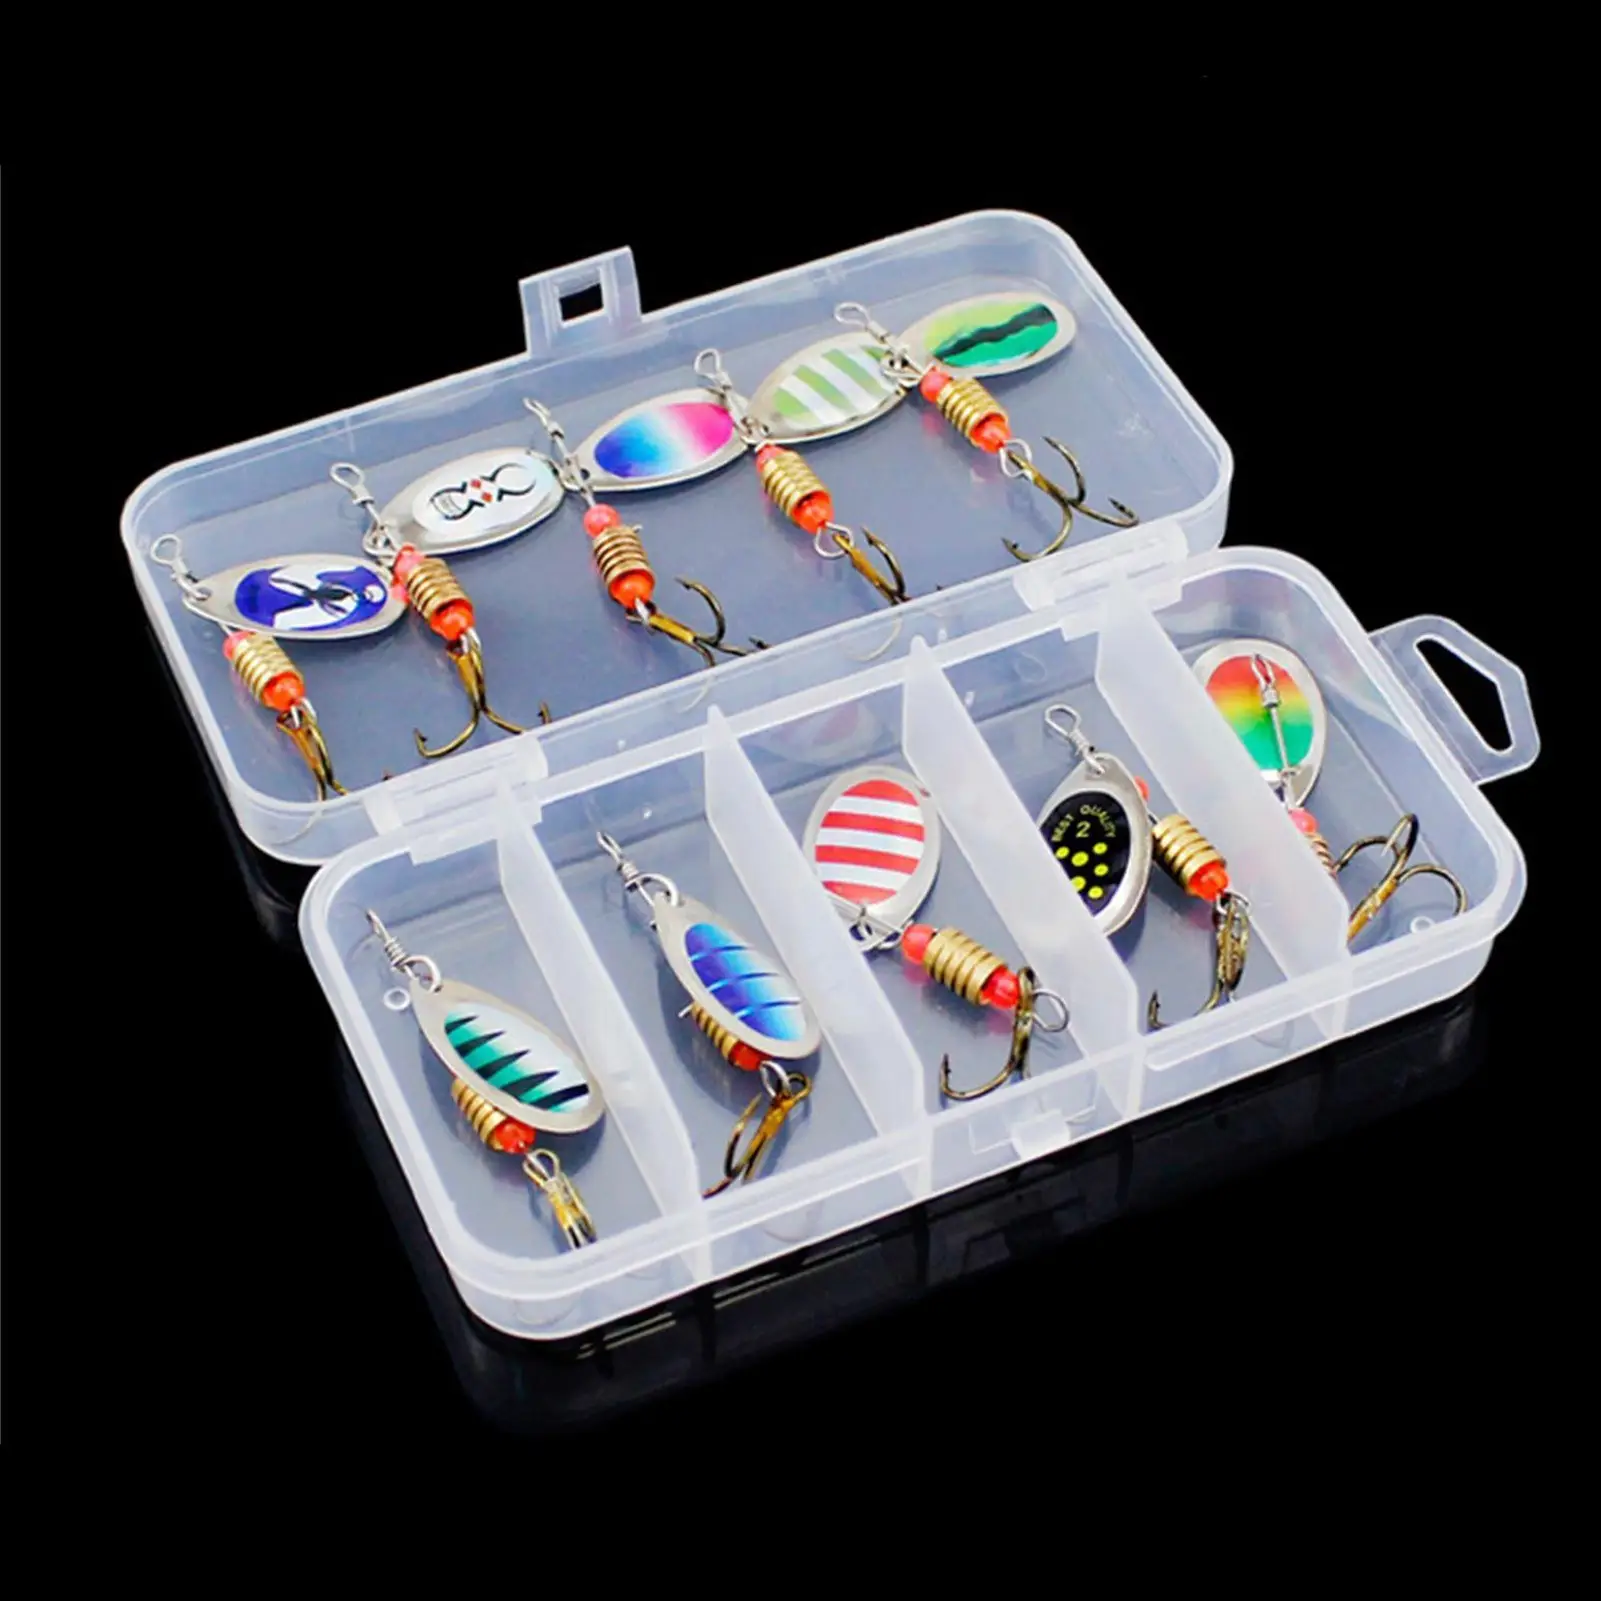 10pcs Spinner Bait Fishing Lure Rotational Spoon Lures Metal Bass Trout Lure Set Spoon Bait Hard Baits with Tackle Box Aritific